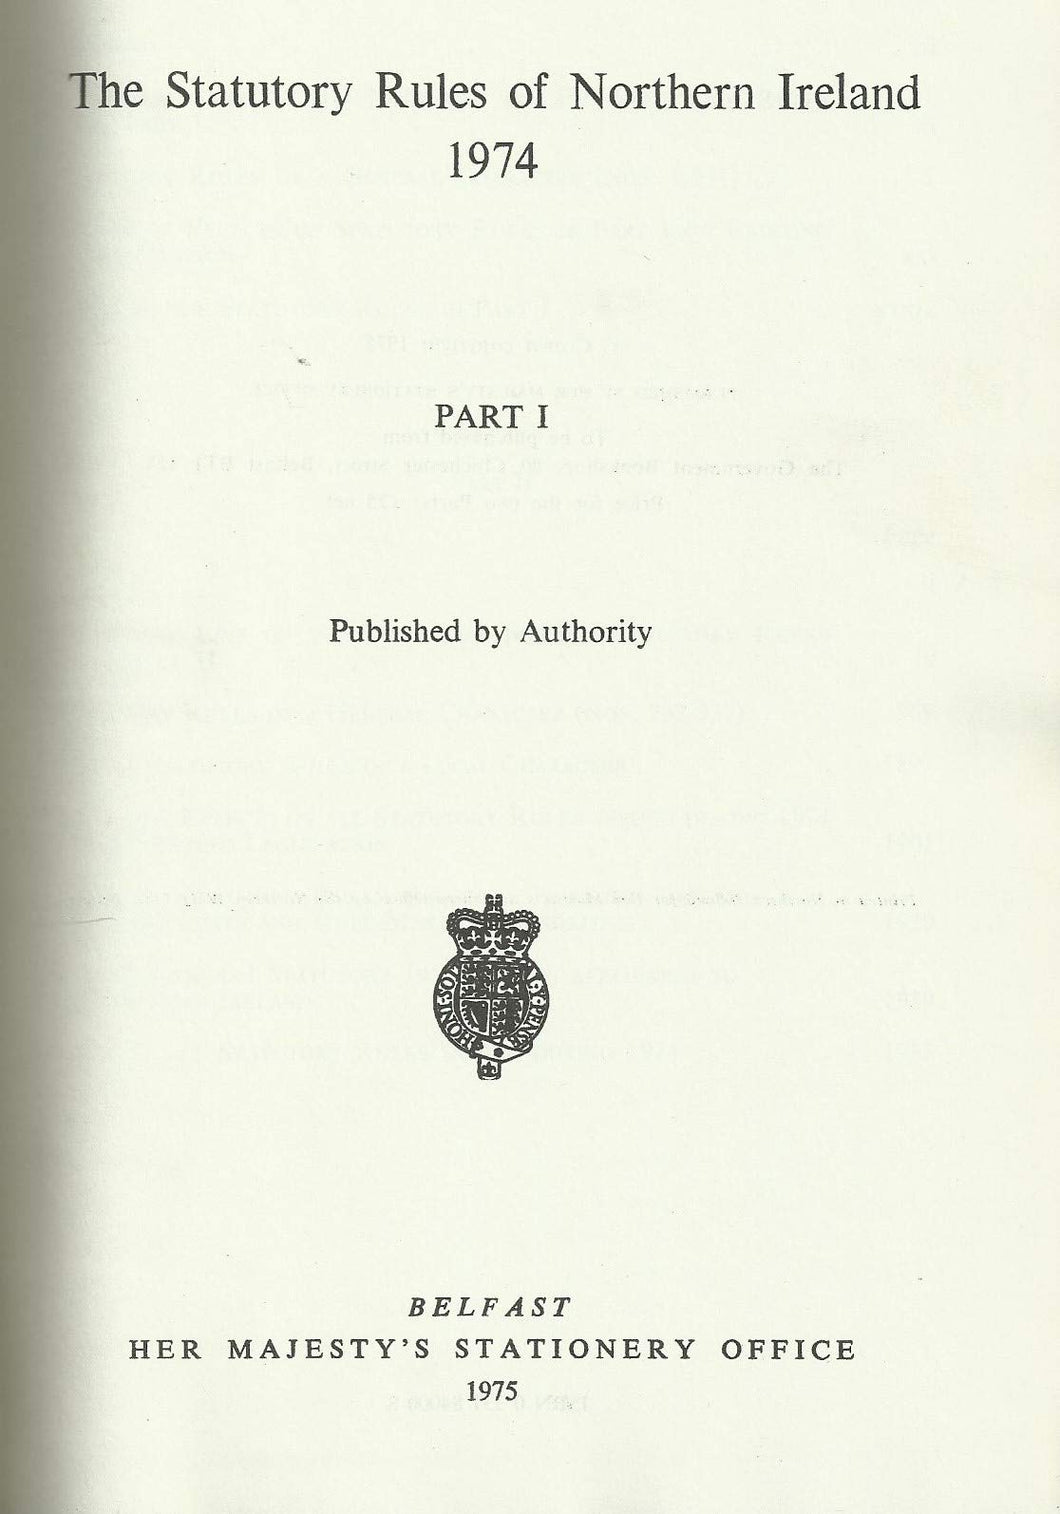 Northern Ireland Statutory Rules and Orders 1974, Part I - The Statutory Rules and Orders of Northern Ireland